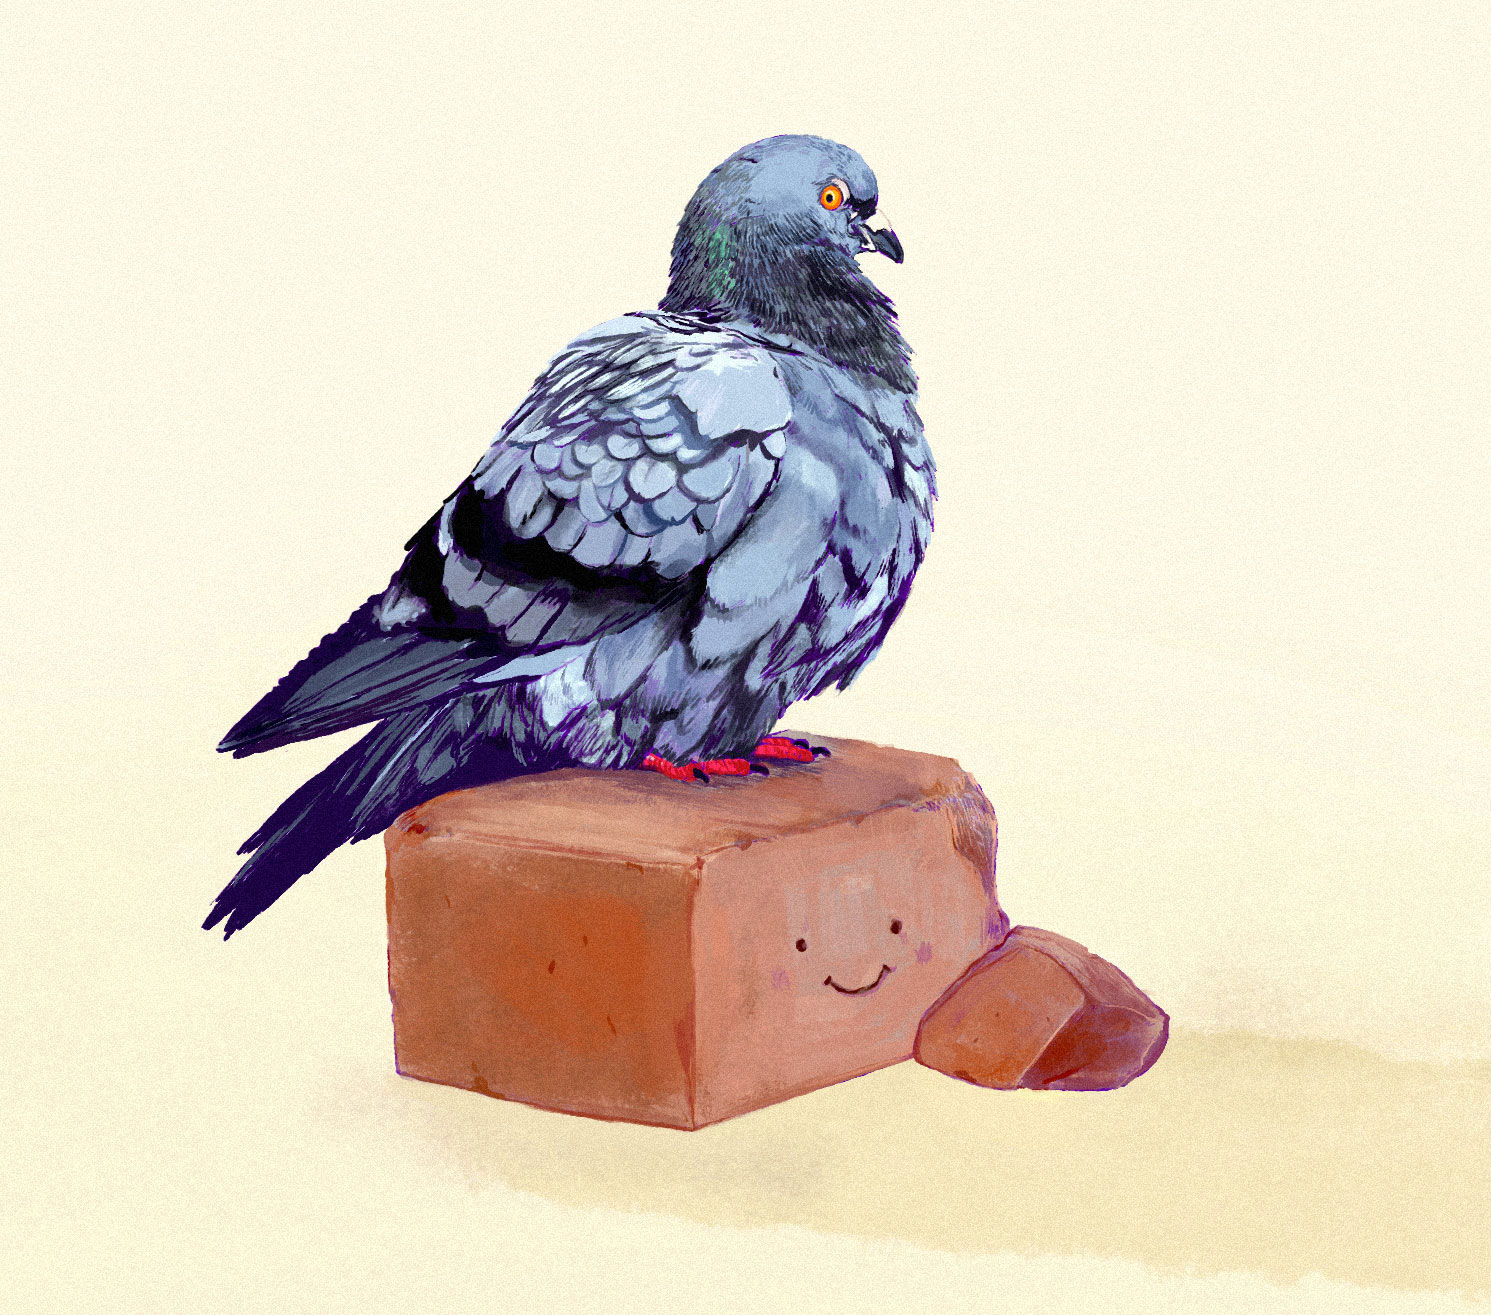  A pigeon with ruffled feathers sitting on an adorably happy red brick